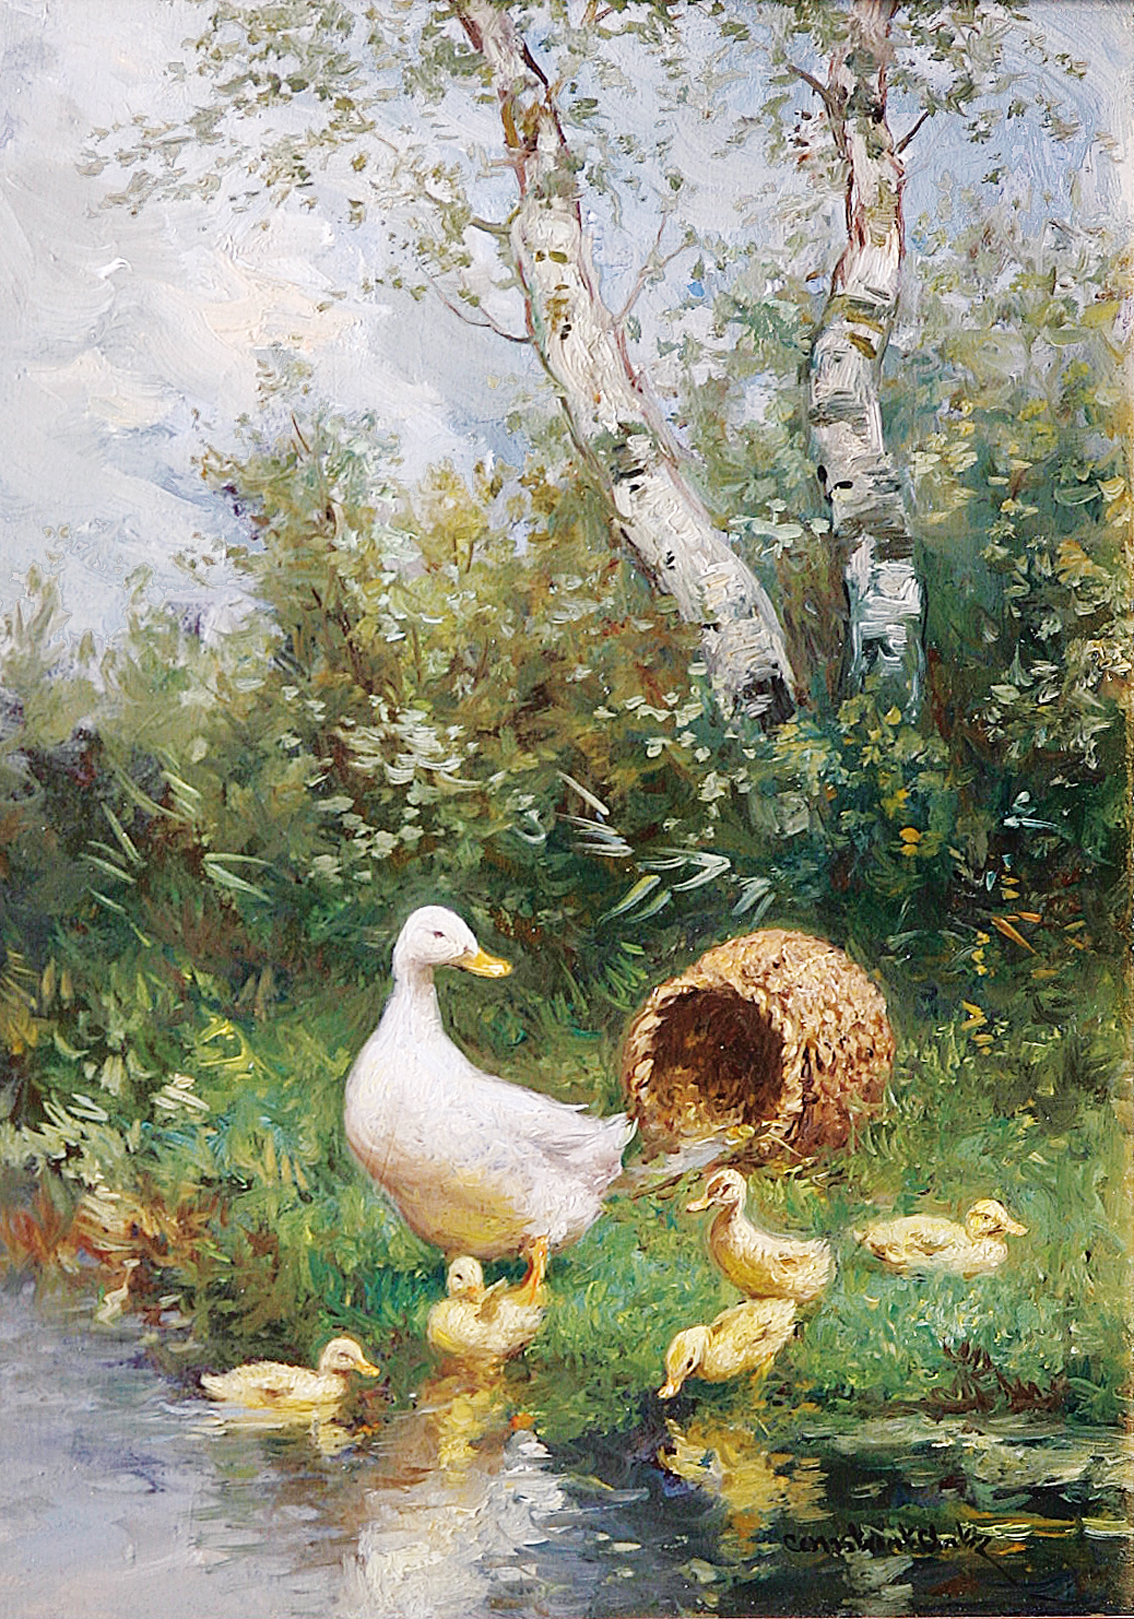 A duck with 5 ducklings and a basket